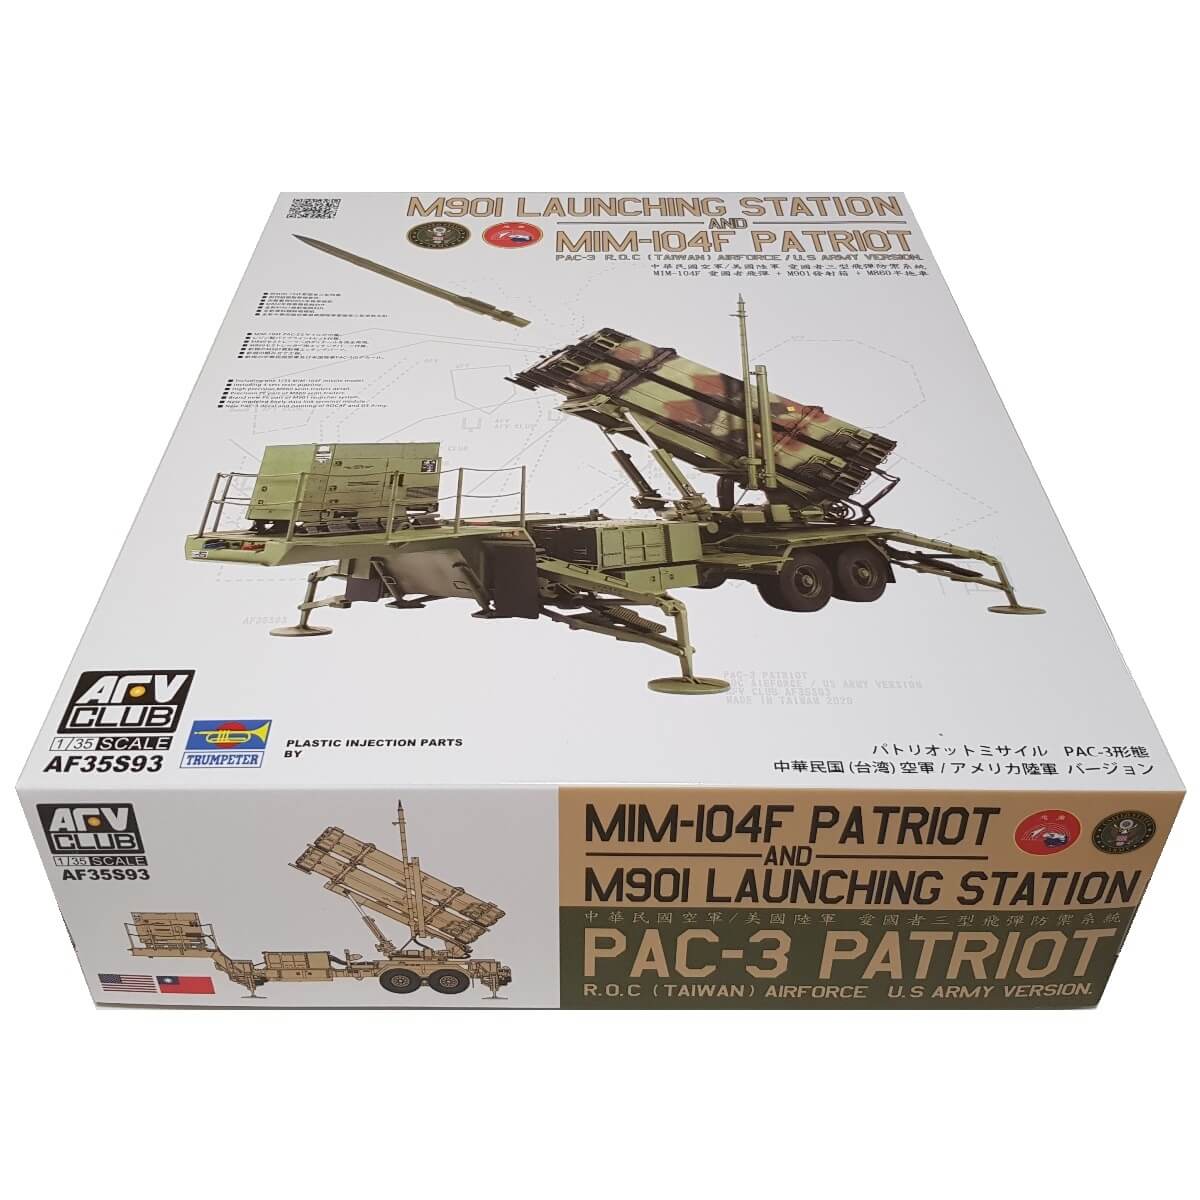 1:35 M901 Launching Station and MIM-104F PATRIOT PAC-3 ROC (Taiwan) Airforce / US Army Version - AFV CLUB